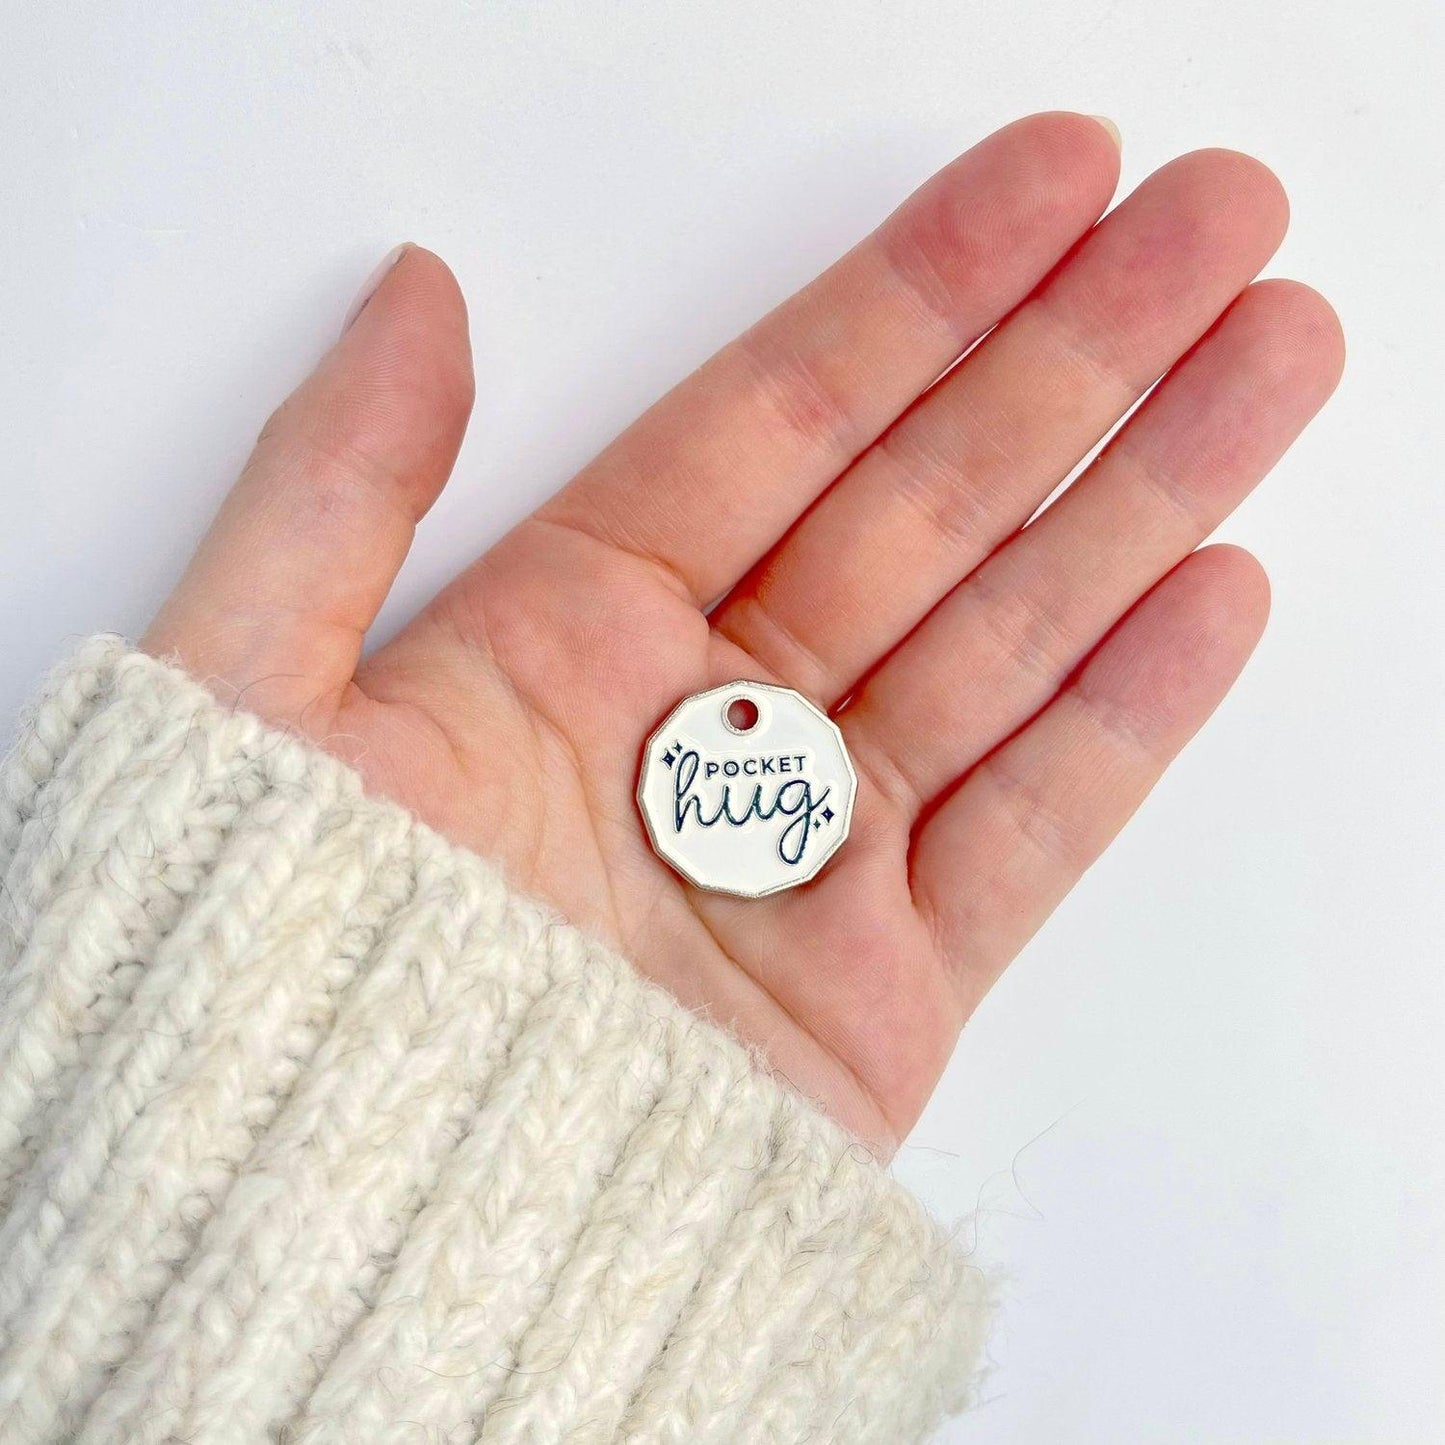 Pocket Hug Token Key Chain - A Reminder That I Care - Letterbox Hug in a Box - BearHugs